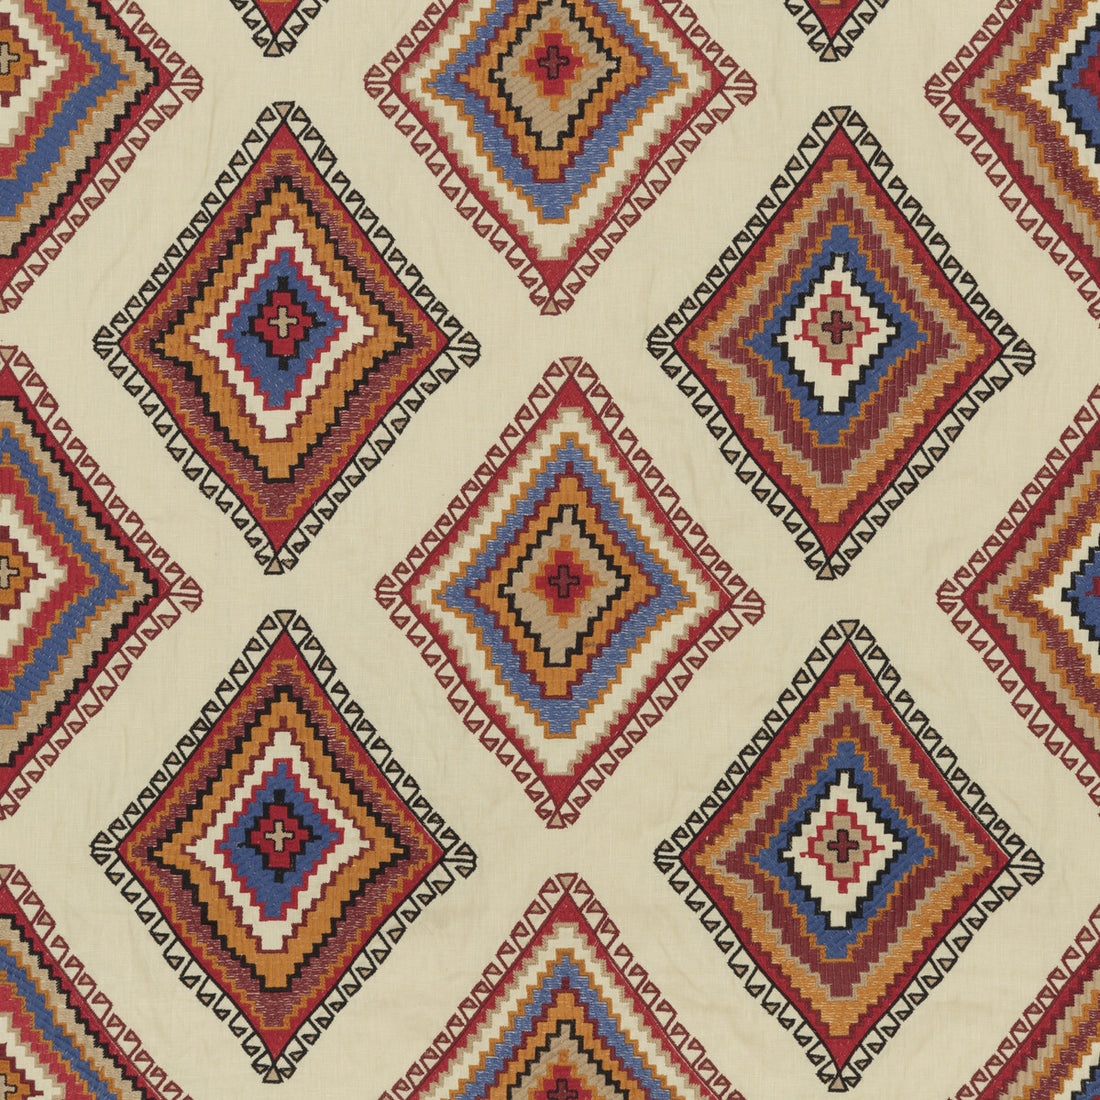 Sundance fabric in sienna/red/blue color - pattern FD767.M38.0 - by Mulberry in the Festival collection